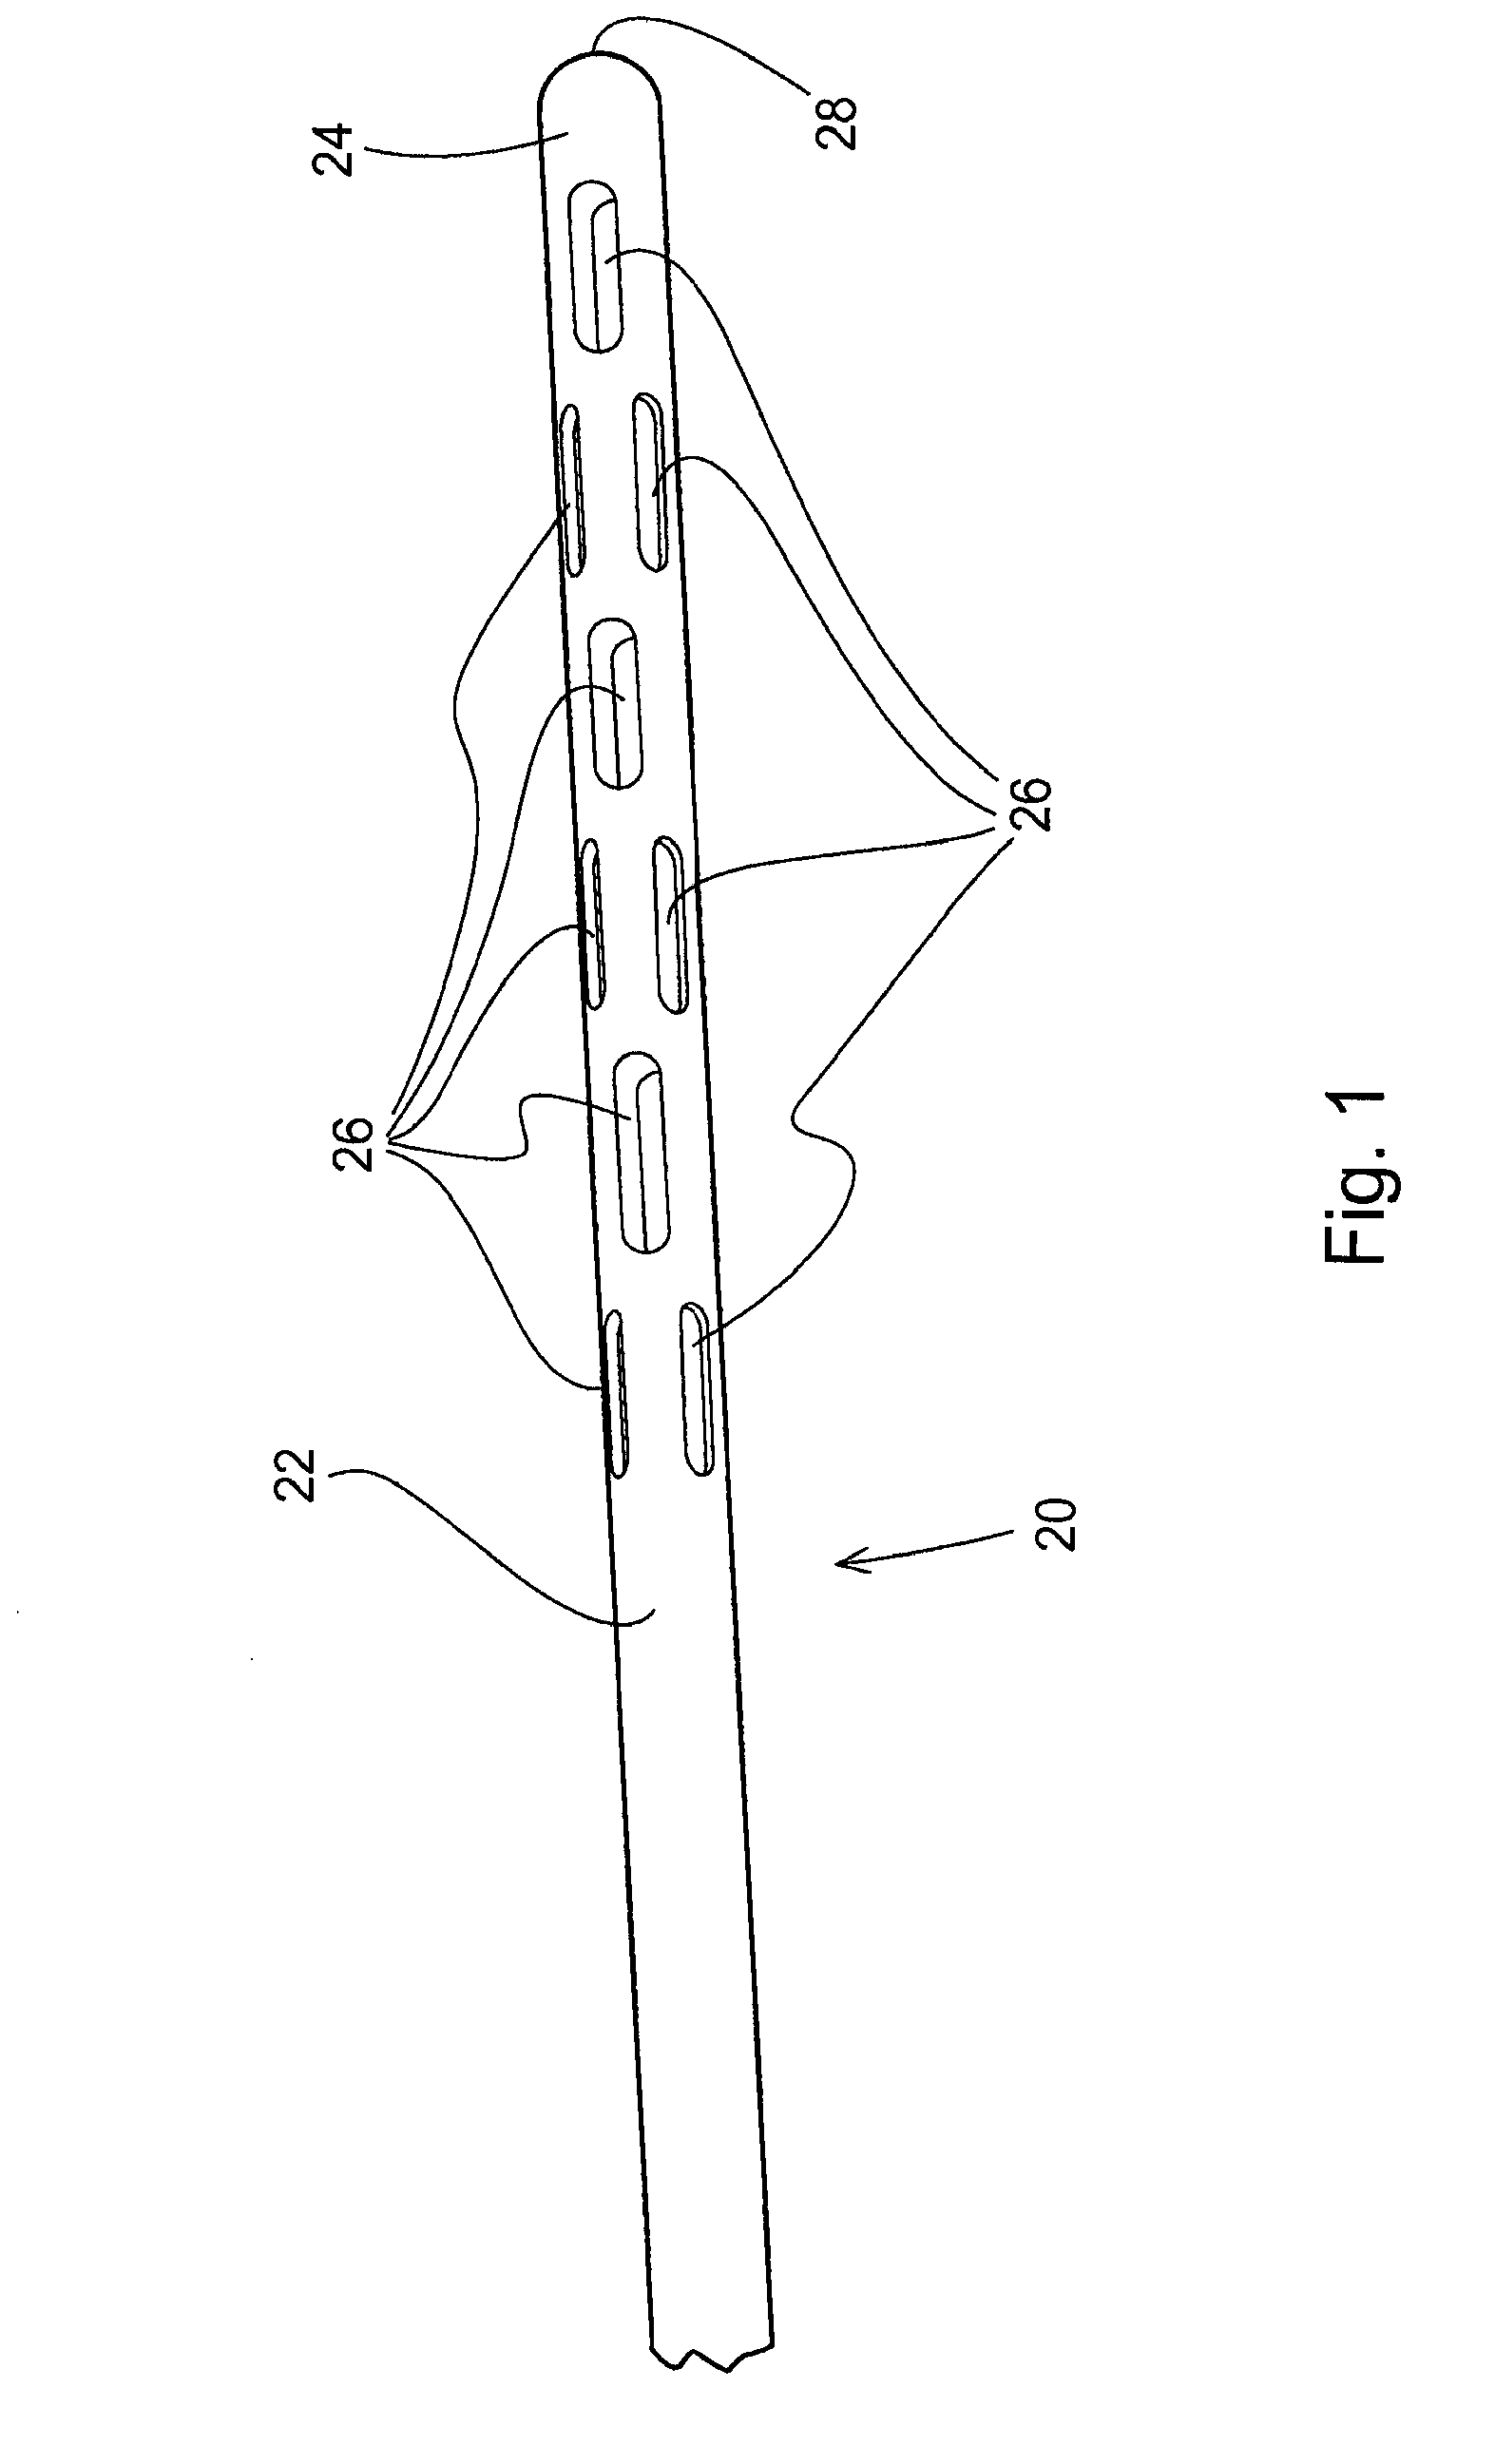 Constant Pressure Syringe For Surgical Use